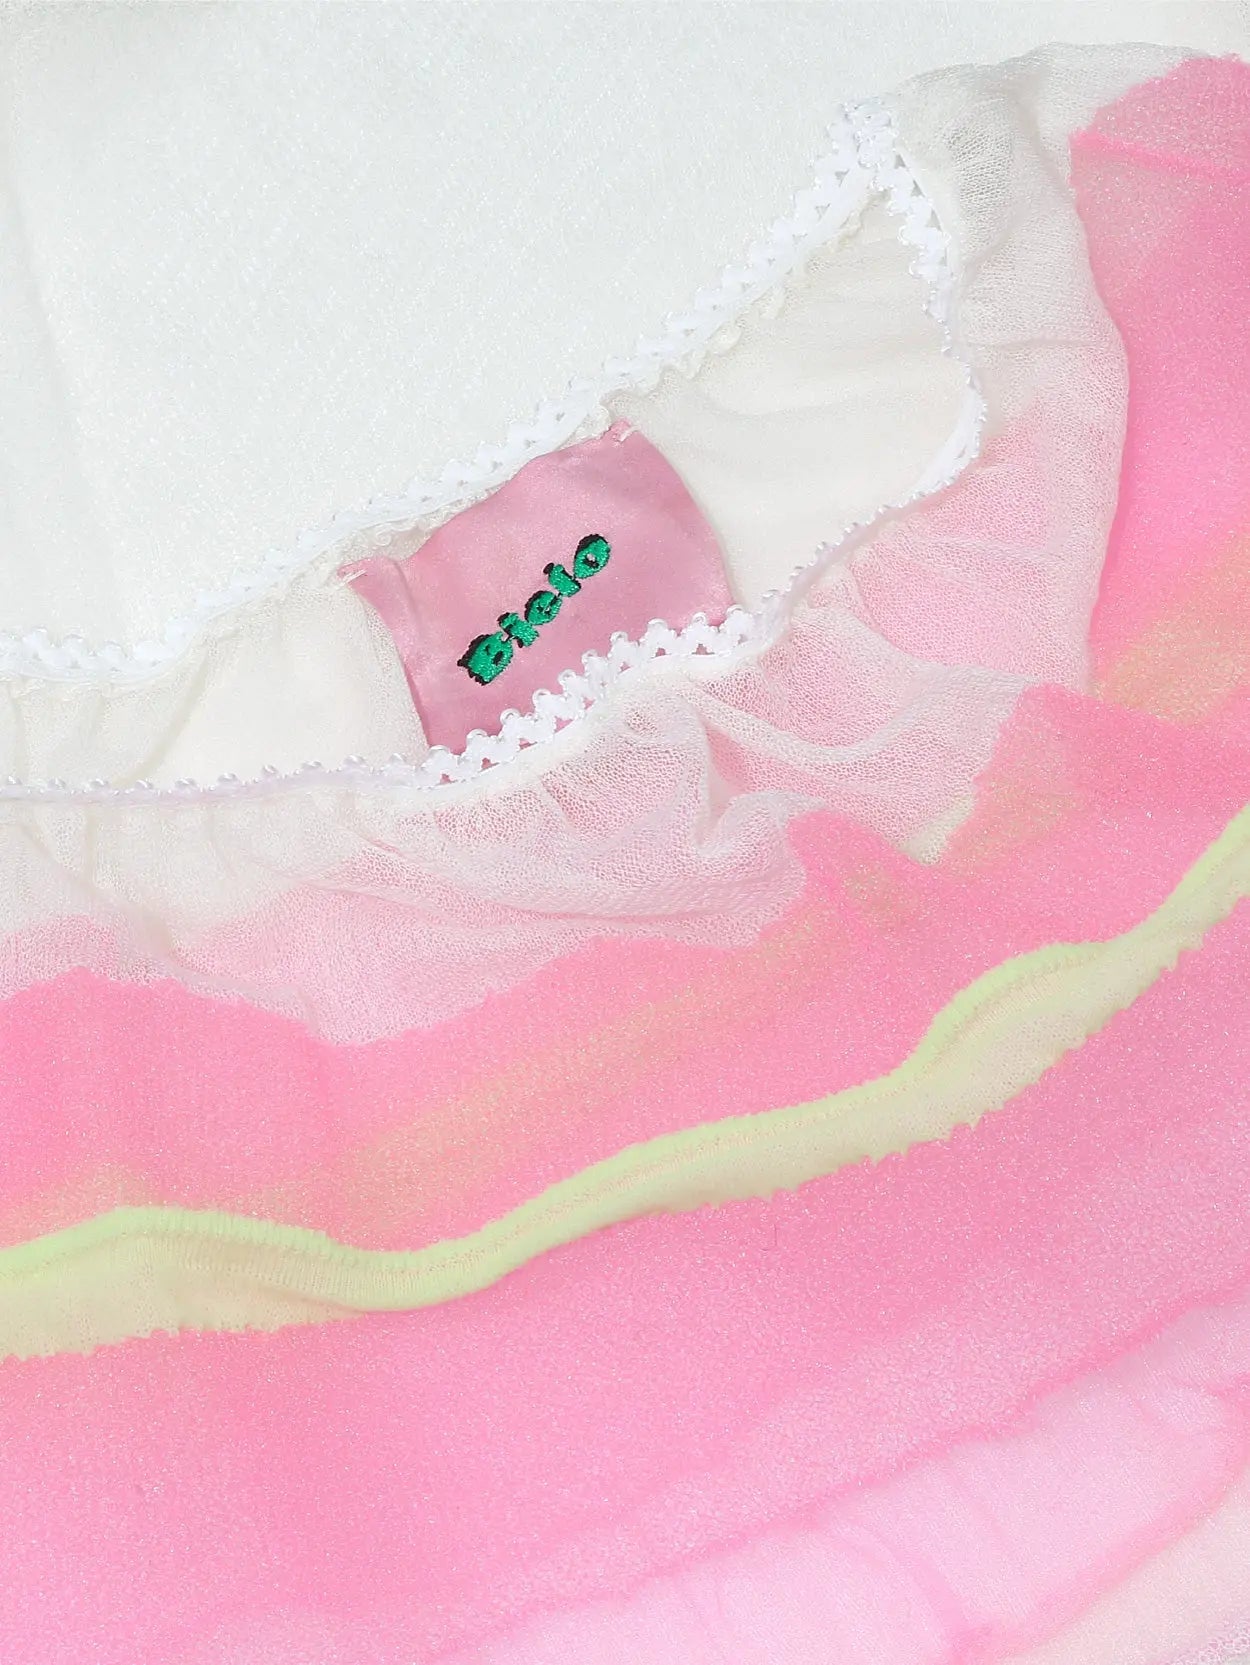 An image of the Spencer Skirt Ecru available at BassalStore, featuring a white lower section and a pink upper section. The skirt has two horizontal lime-green stripes near the top and an elastic waistband for a comfortable fit. This stylish item is brought to you by Bielo.